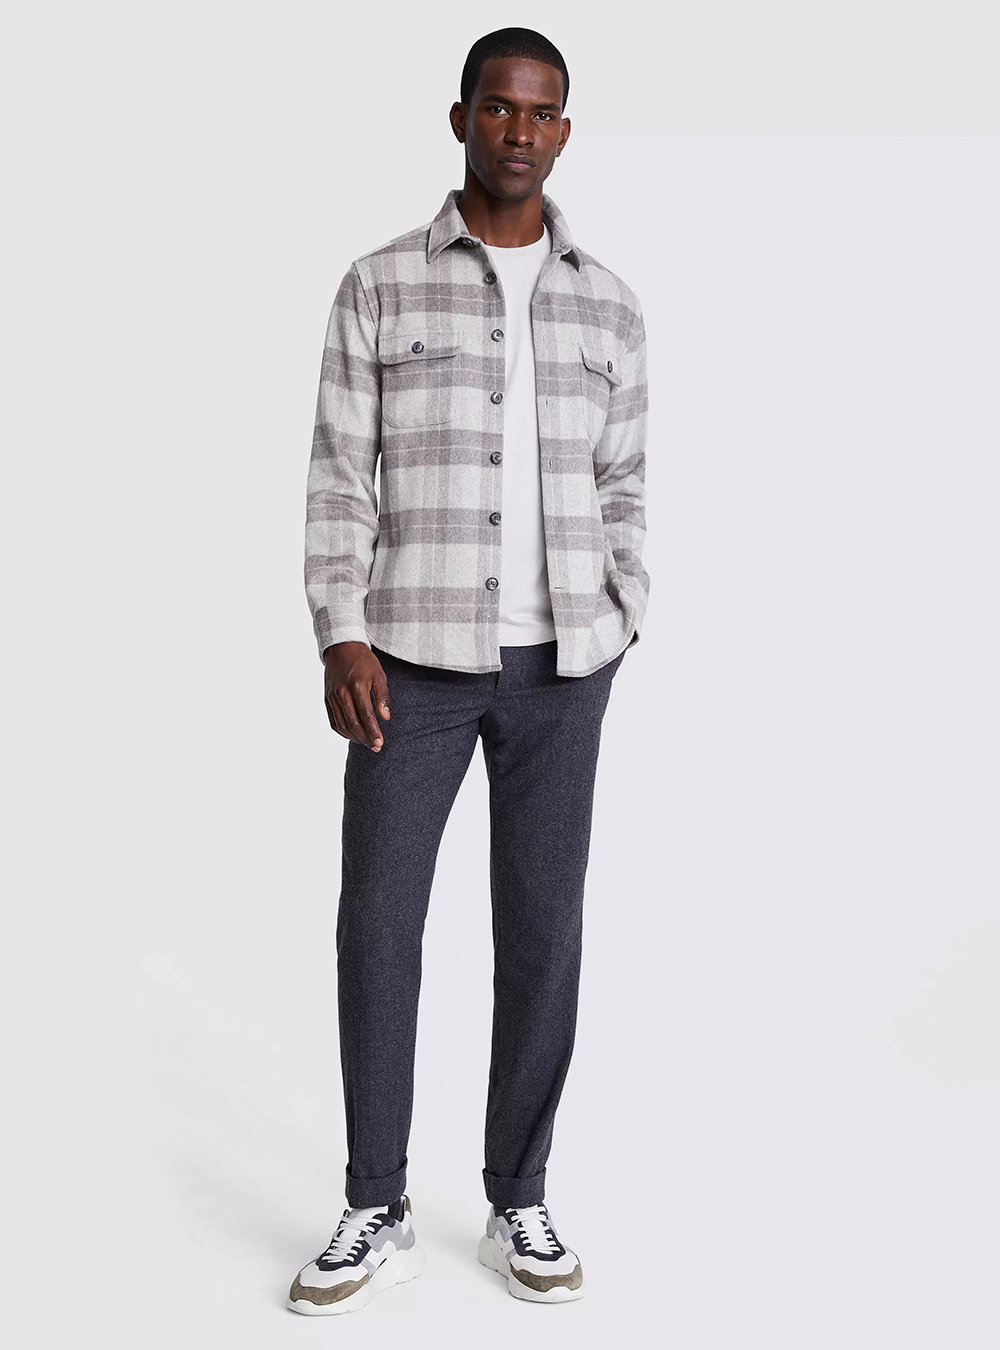 taupe checked flannel shirt, white t-shirt, and charcoal pants